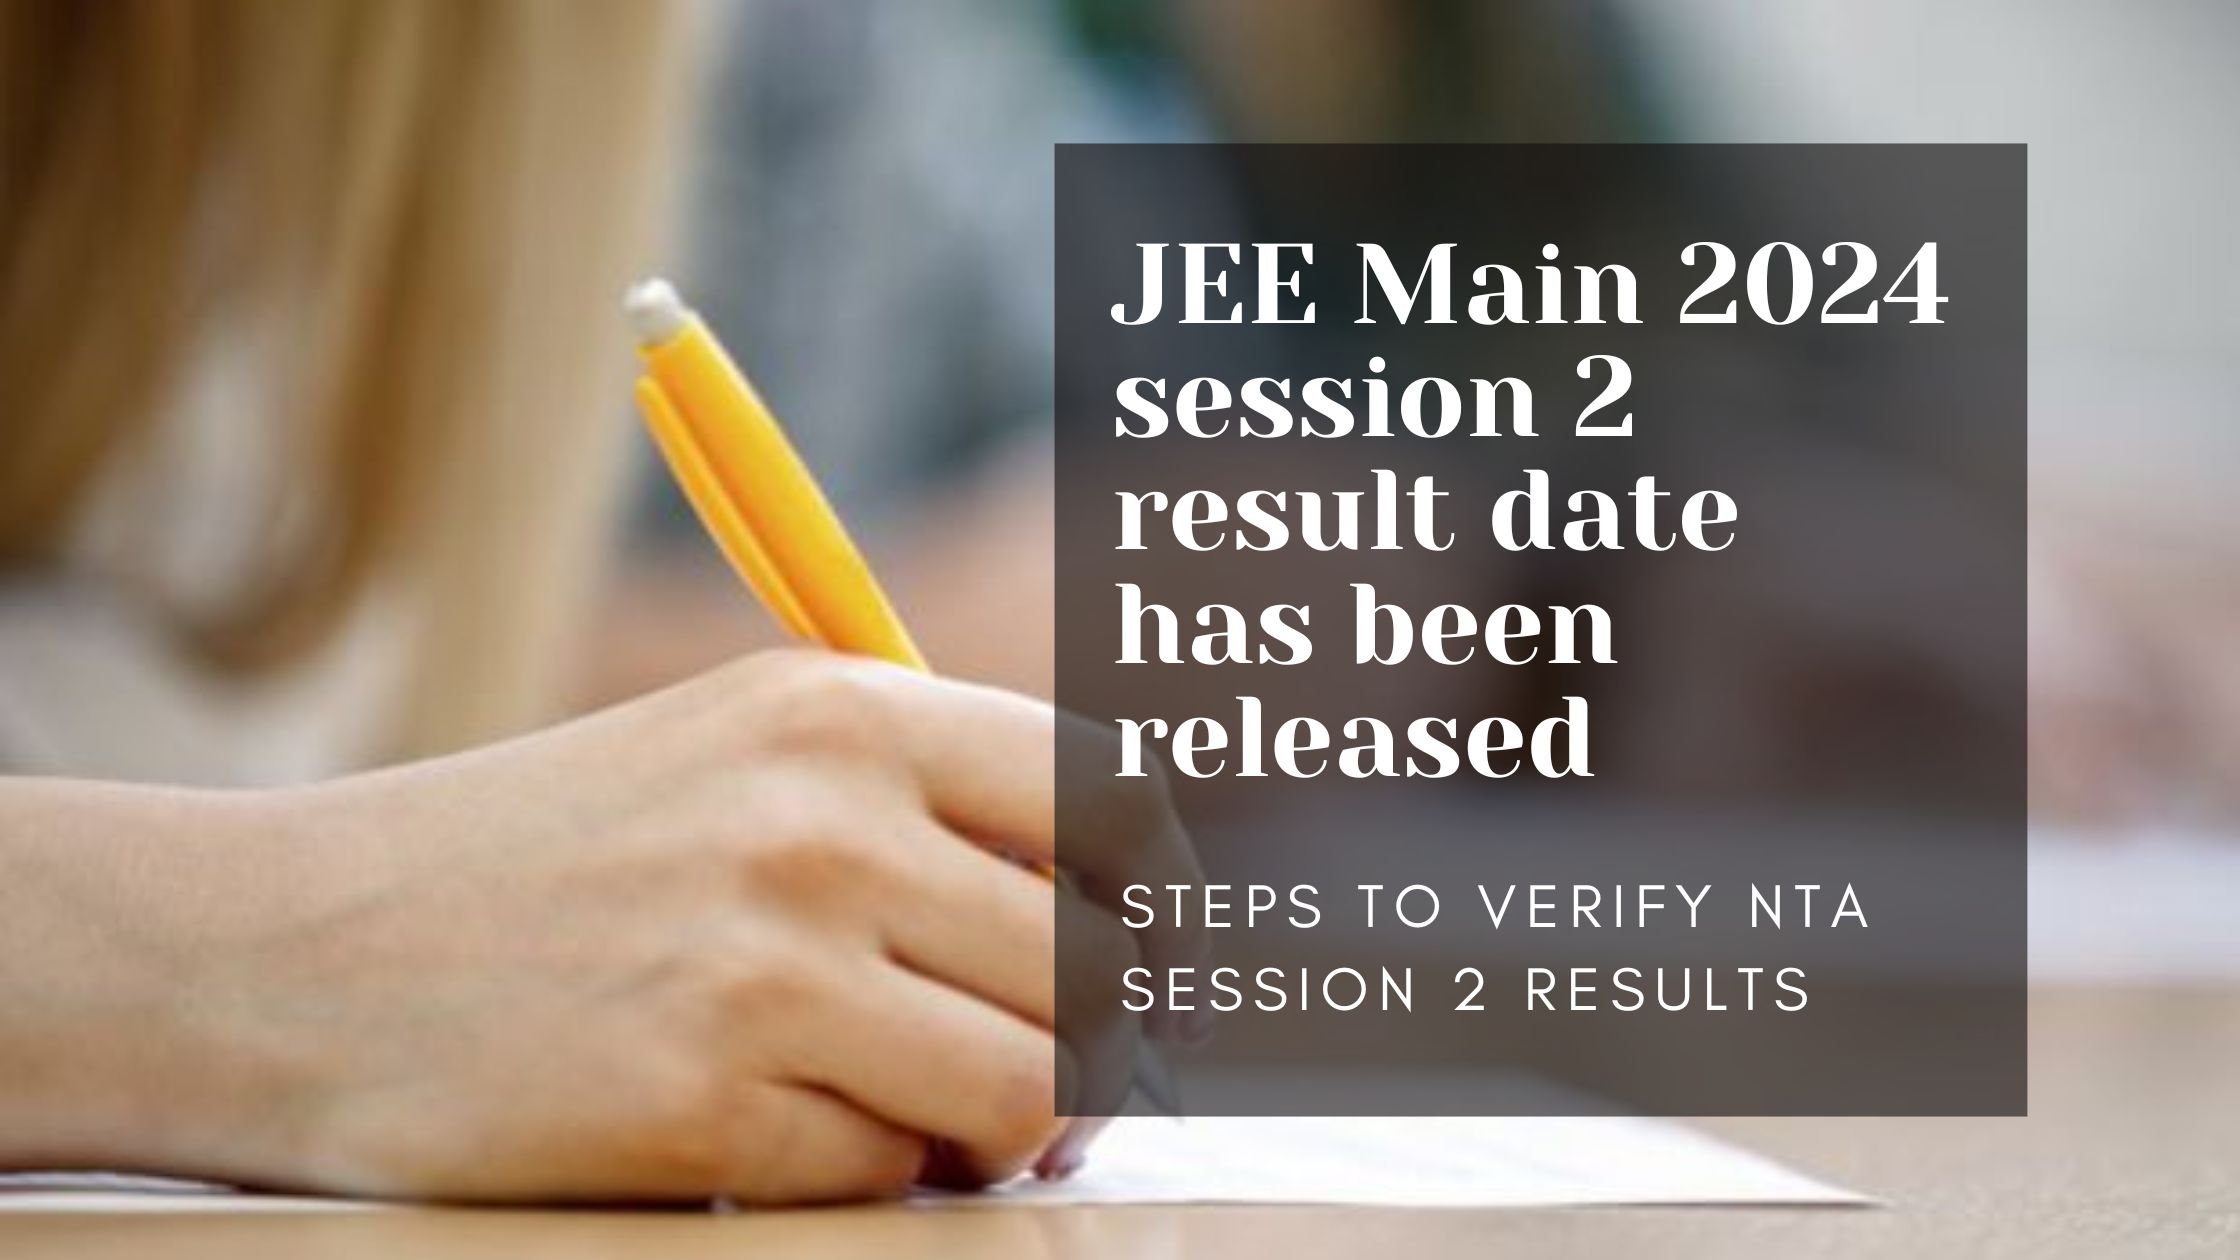 JEE Main 2024 session 2 result date has been released; steps to verify NTA session 2 results